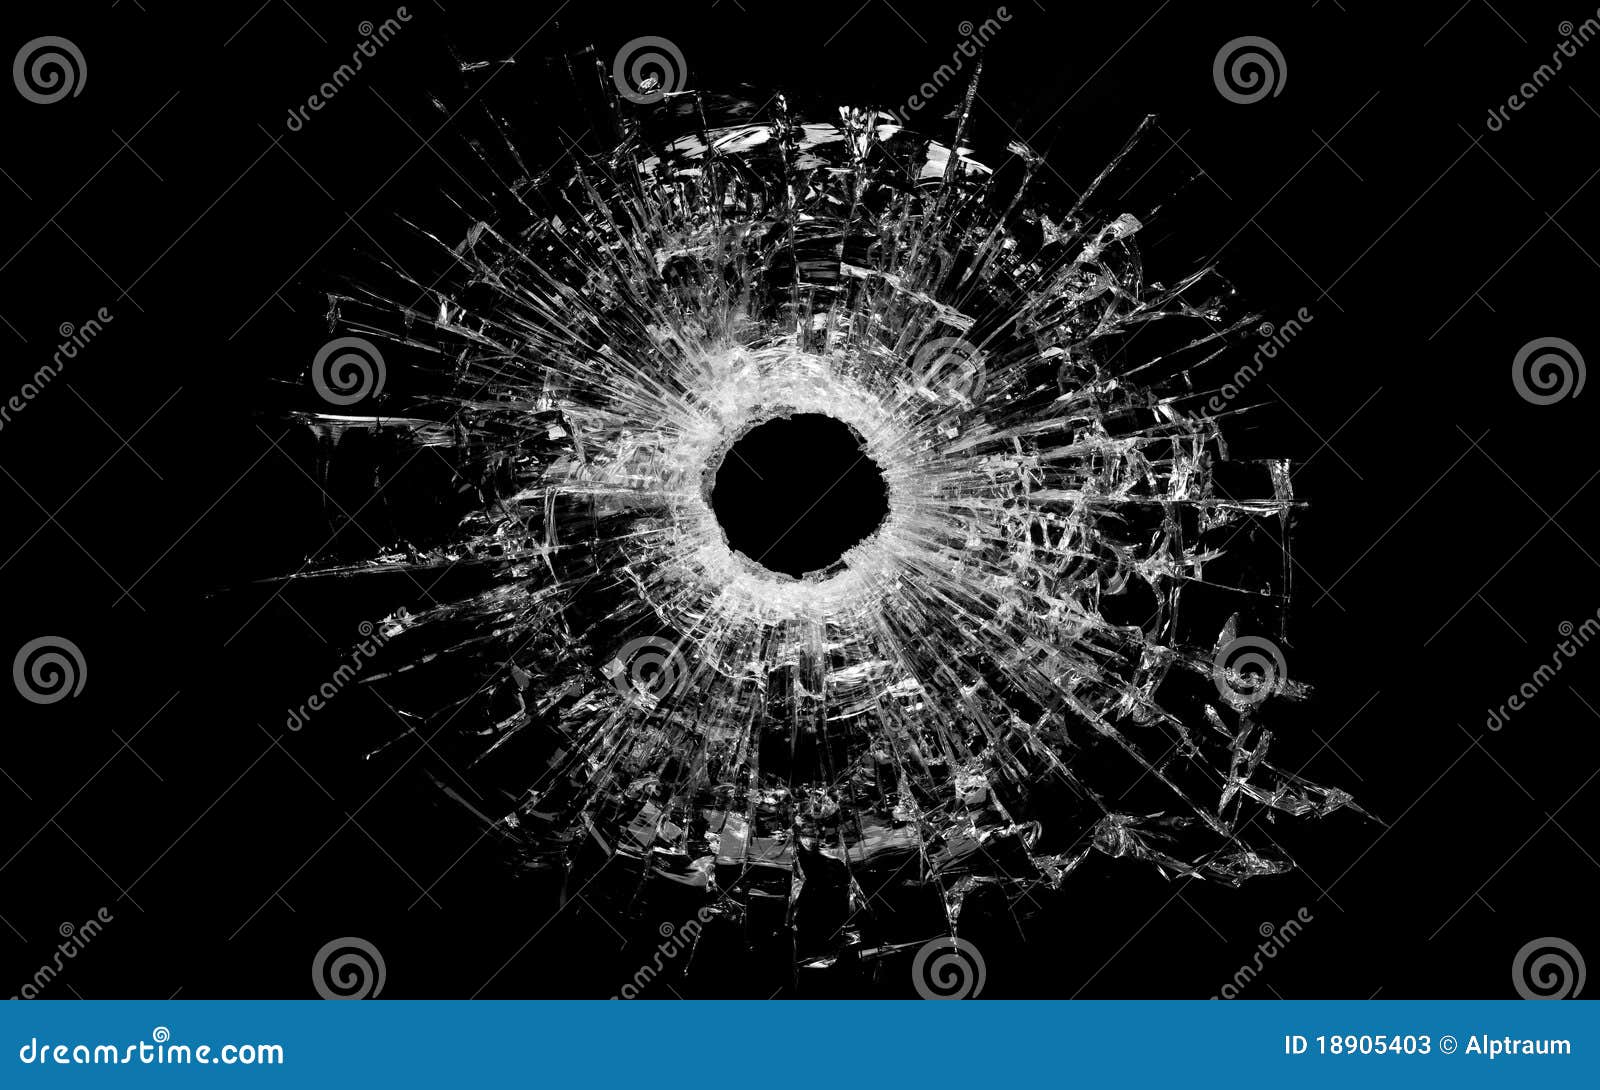 bullet hole in glass  on black